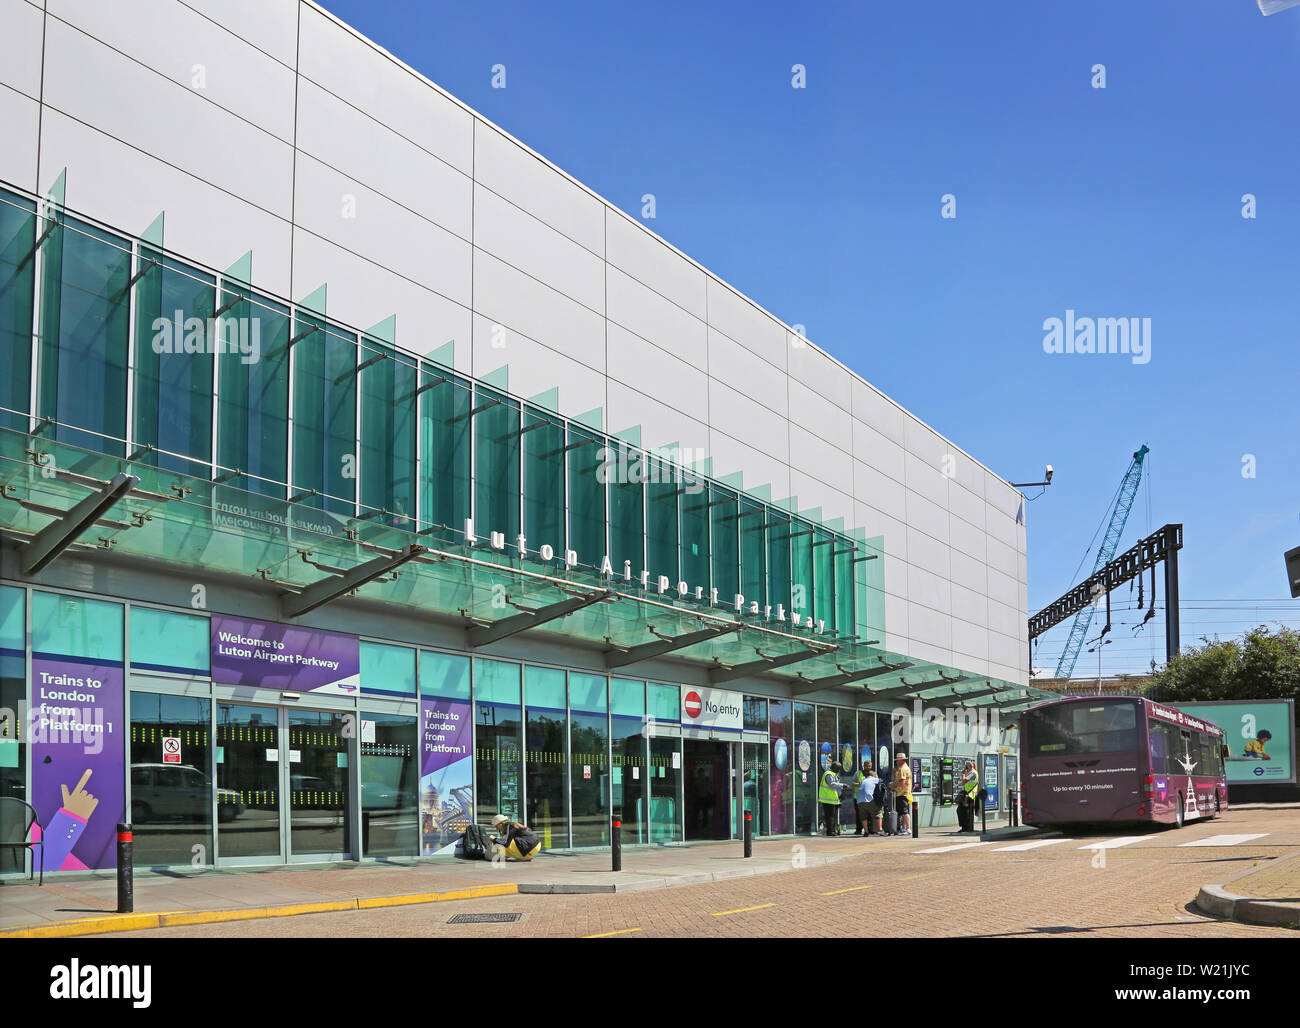 Luton Airport, London. Entrance to Luton Airport Parkway Station. Passengers wait to join the shuttle bus to the airport terminal. Stock Photo